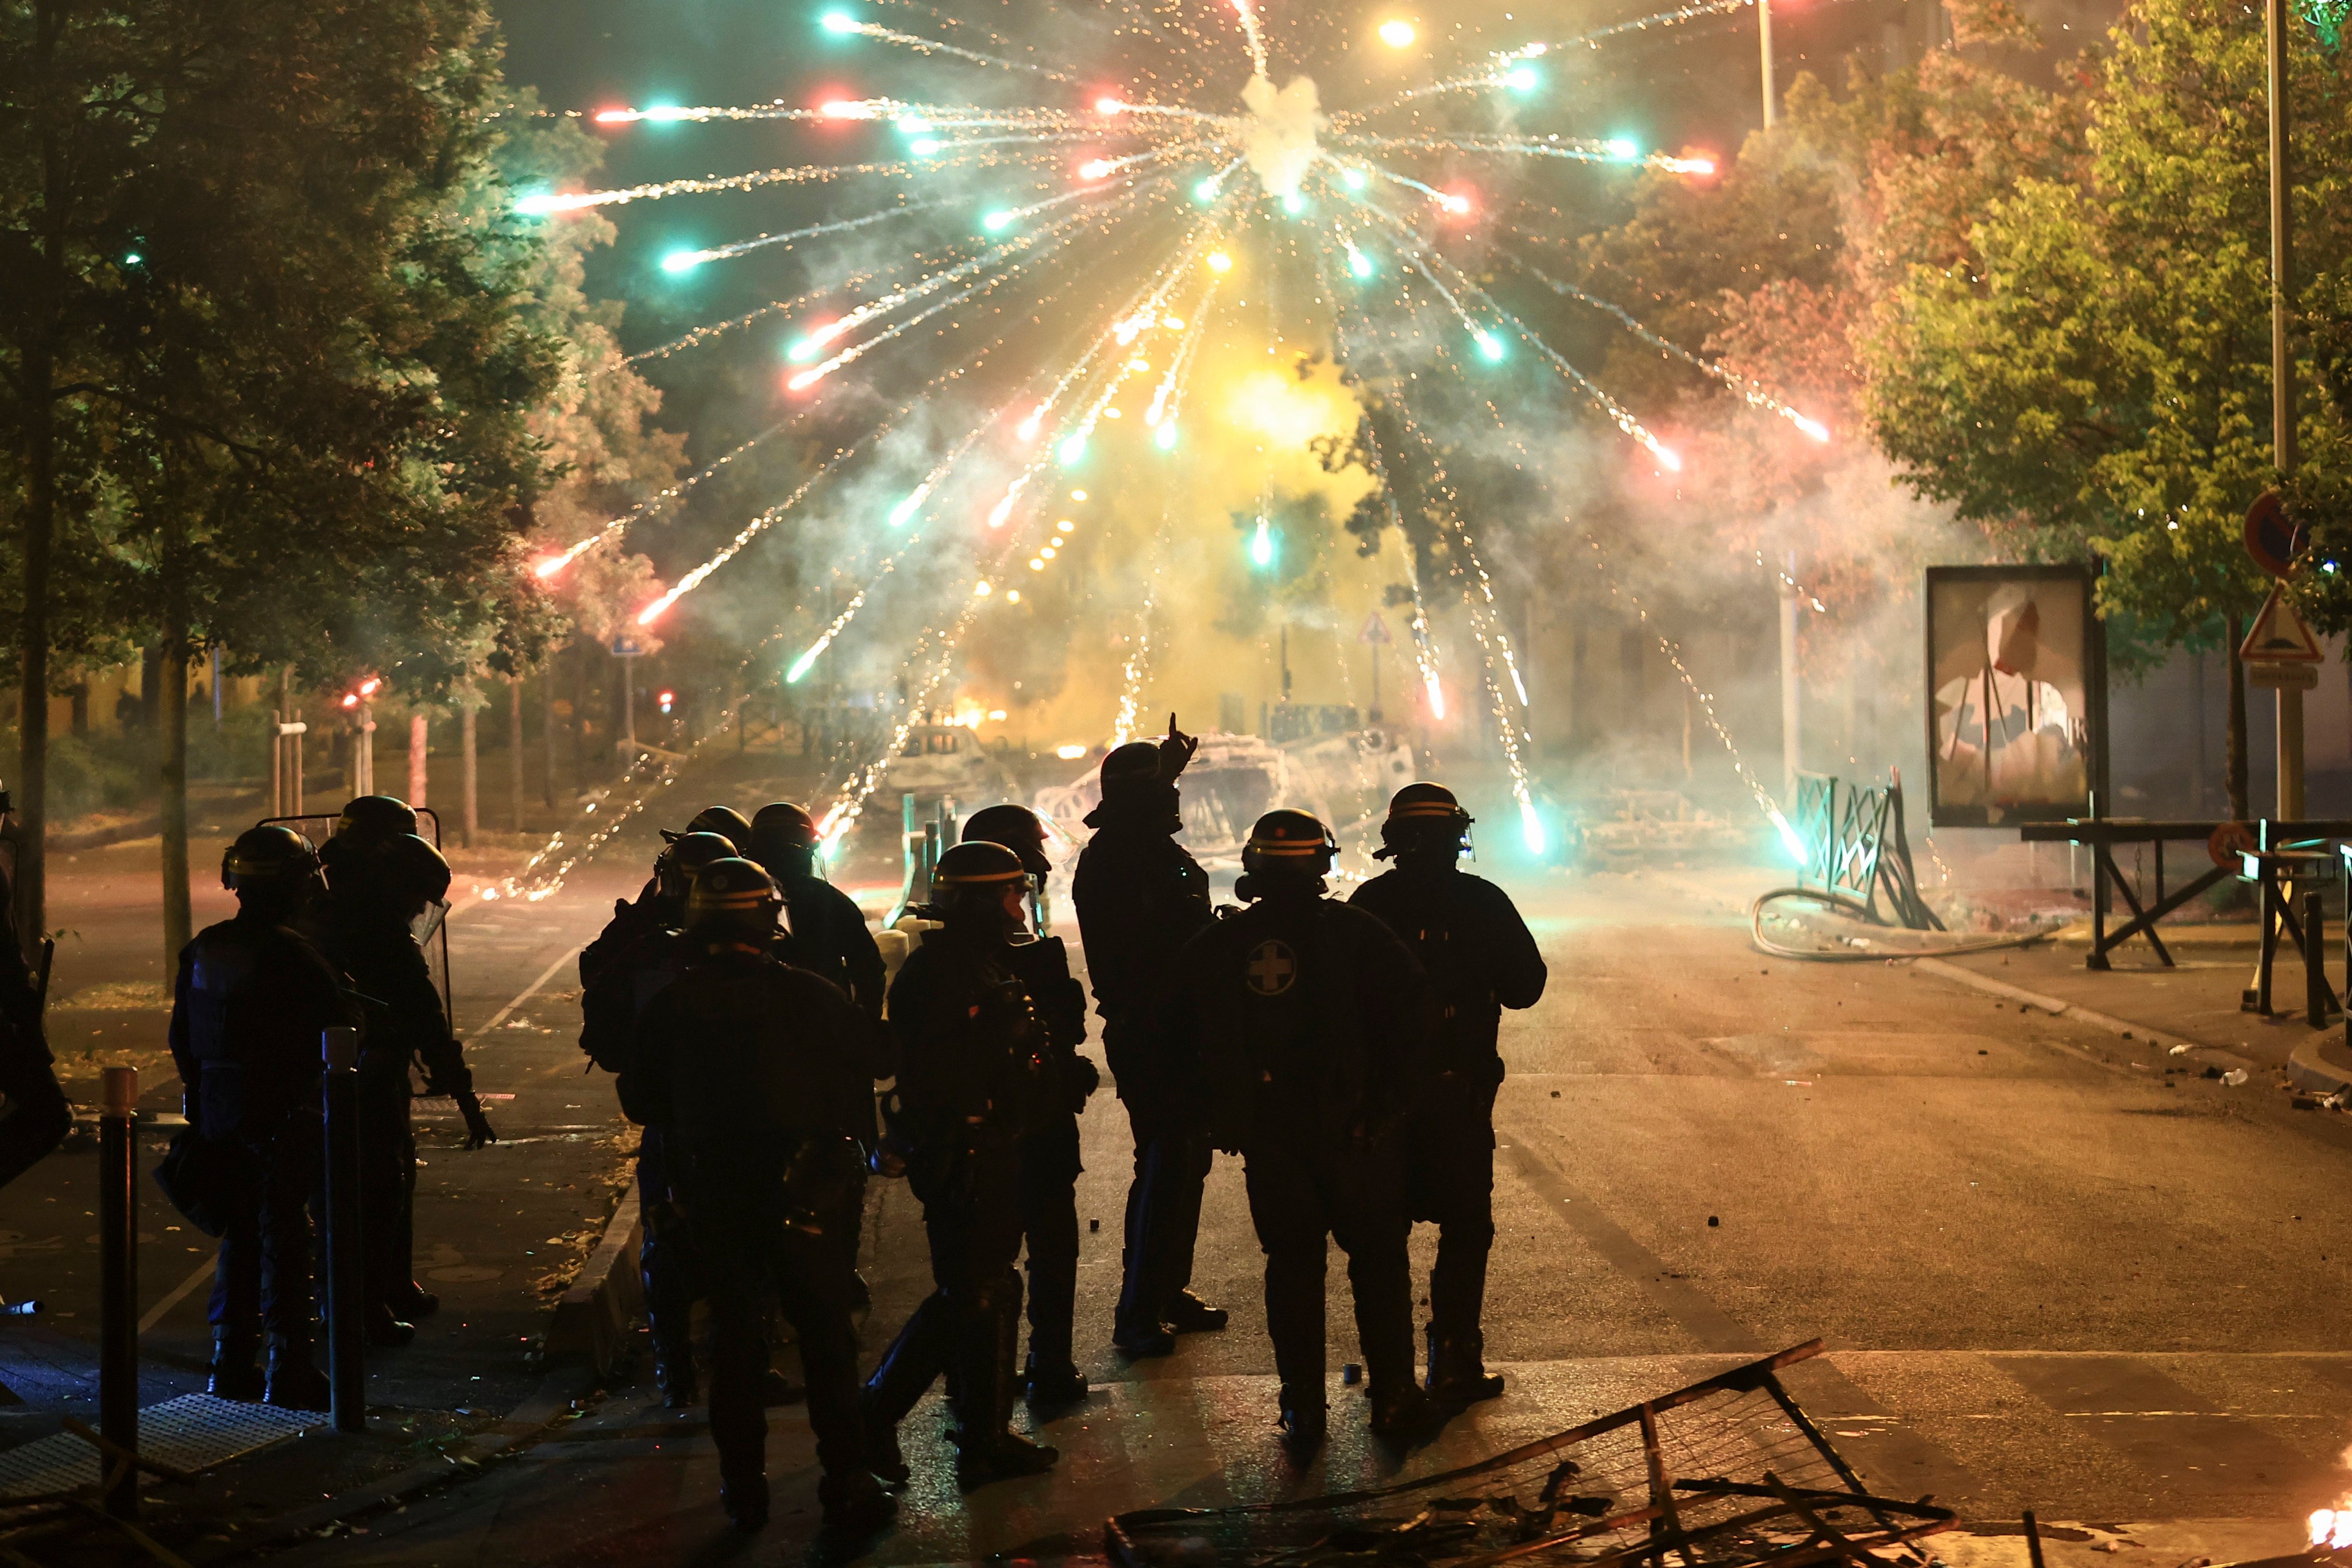 Police stand amid firecrackers on the third night of protests sparked by the fatal police shooting of a 17-year-old in the Paris suburb of Nanterre on June 30. The role of TikTok and other social media platforms in protests across France has come under scrutiny from President Emmanuel Macron and other politicians. Photo: AP